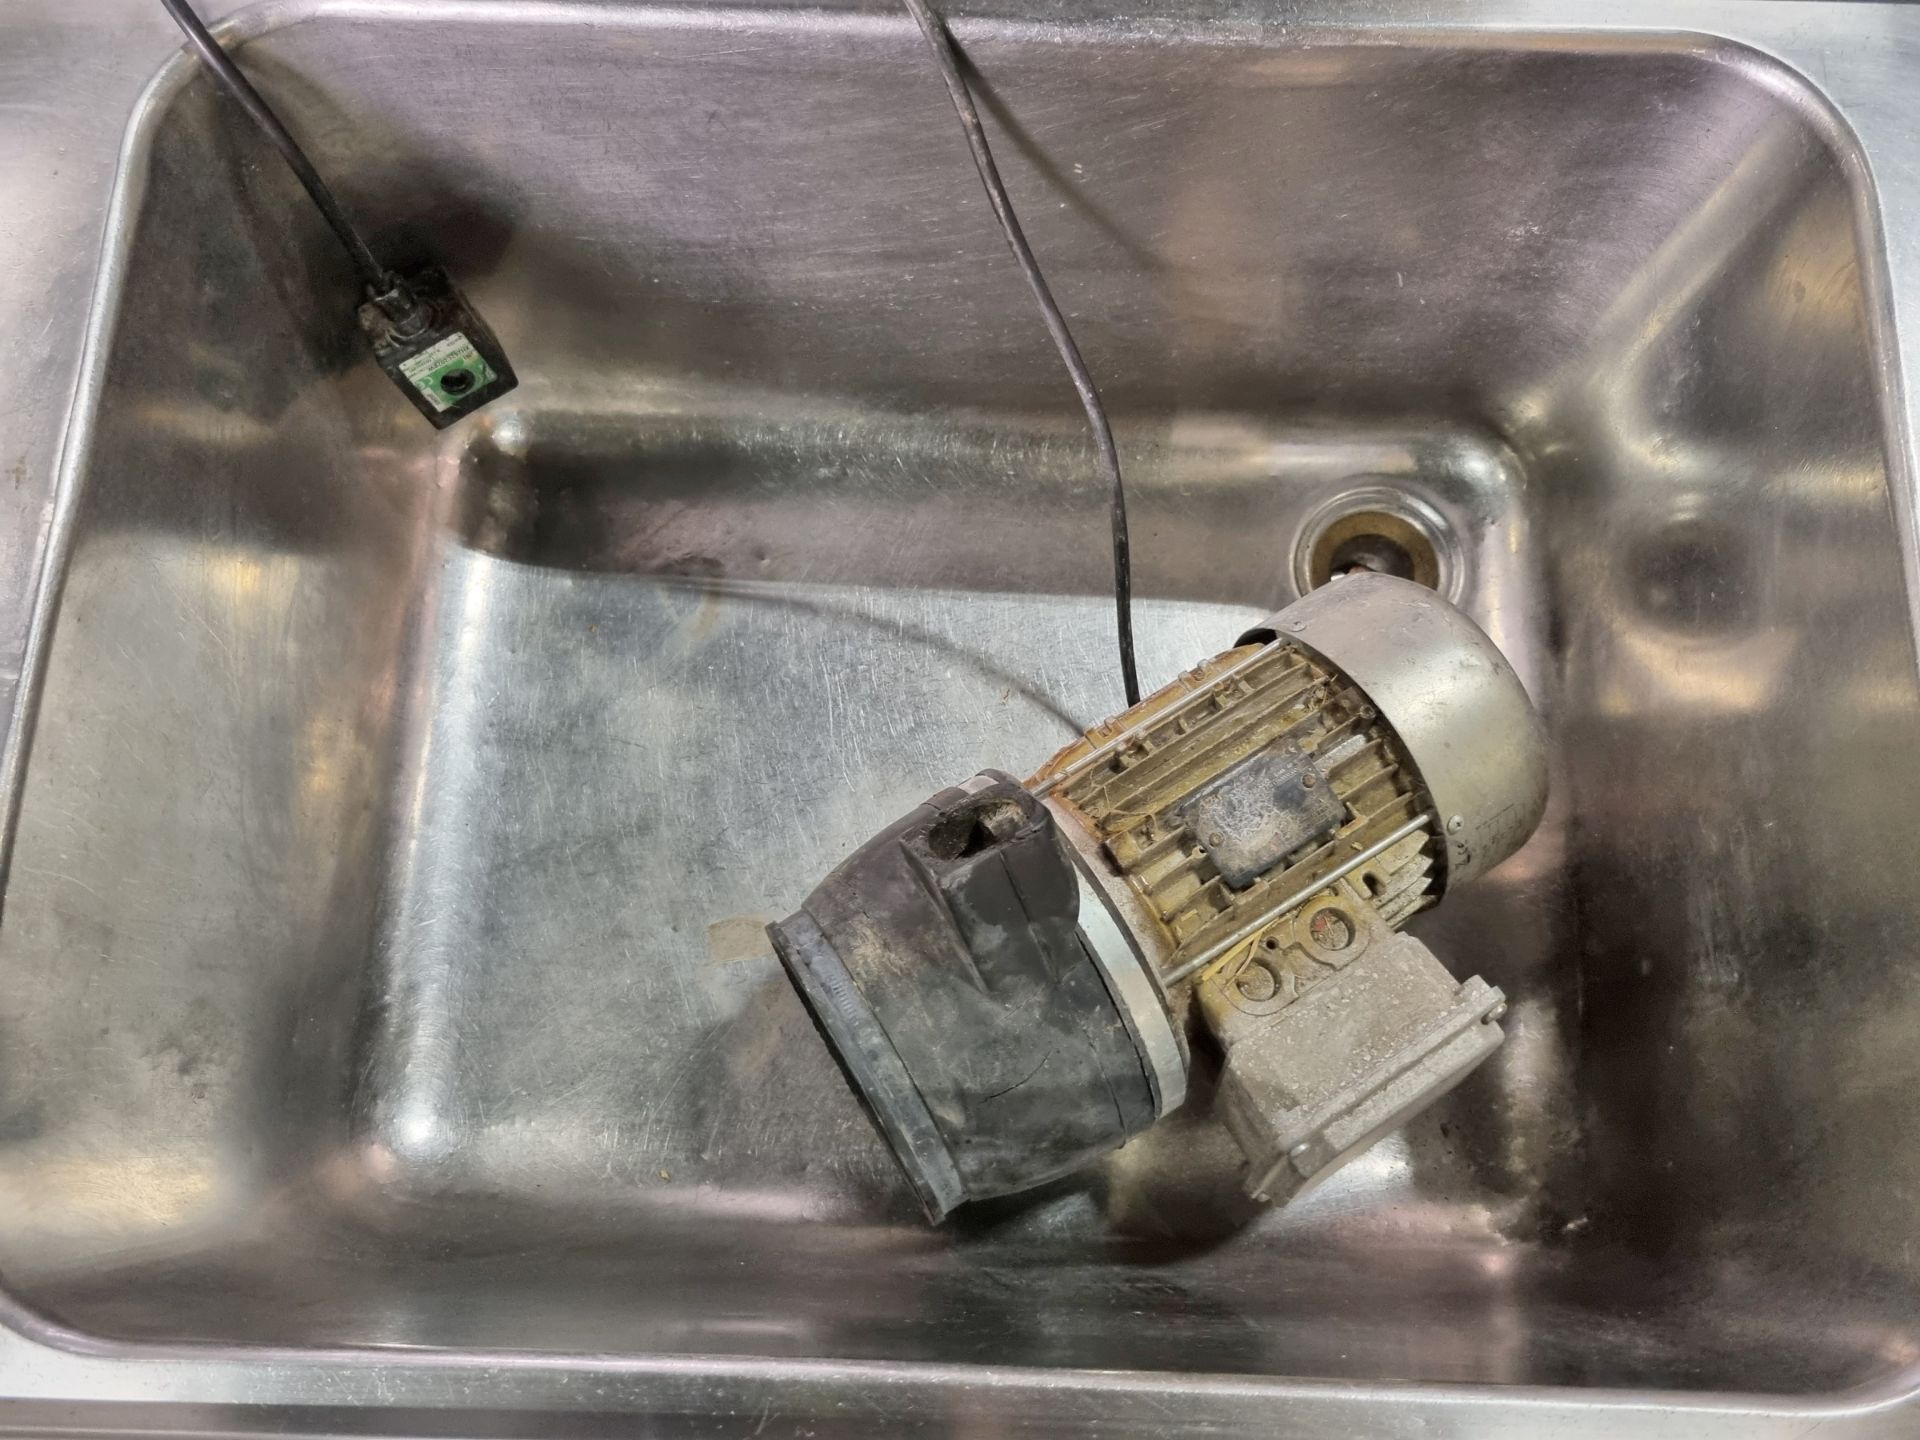 Stainless steel double sink unit with waste disposal shoot (5 pin connector for motor) - Image 5 of 7